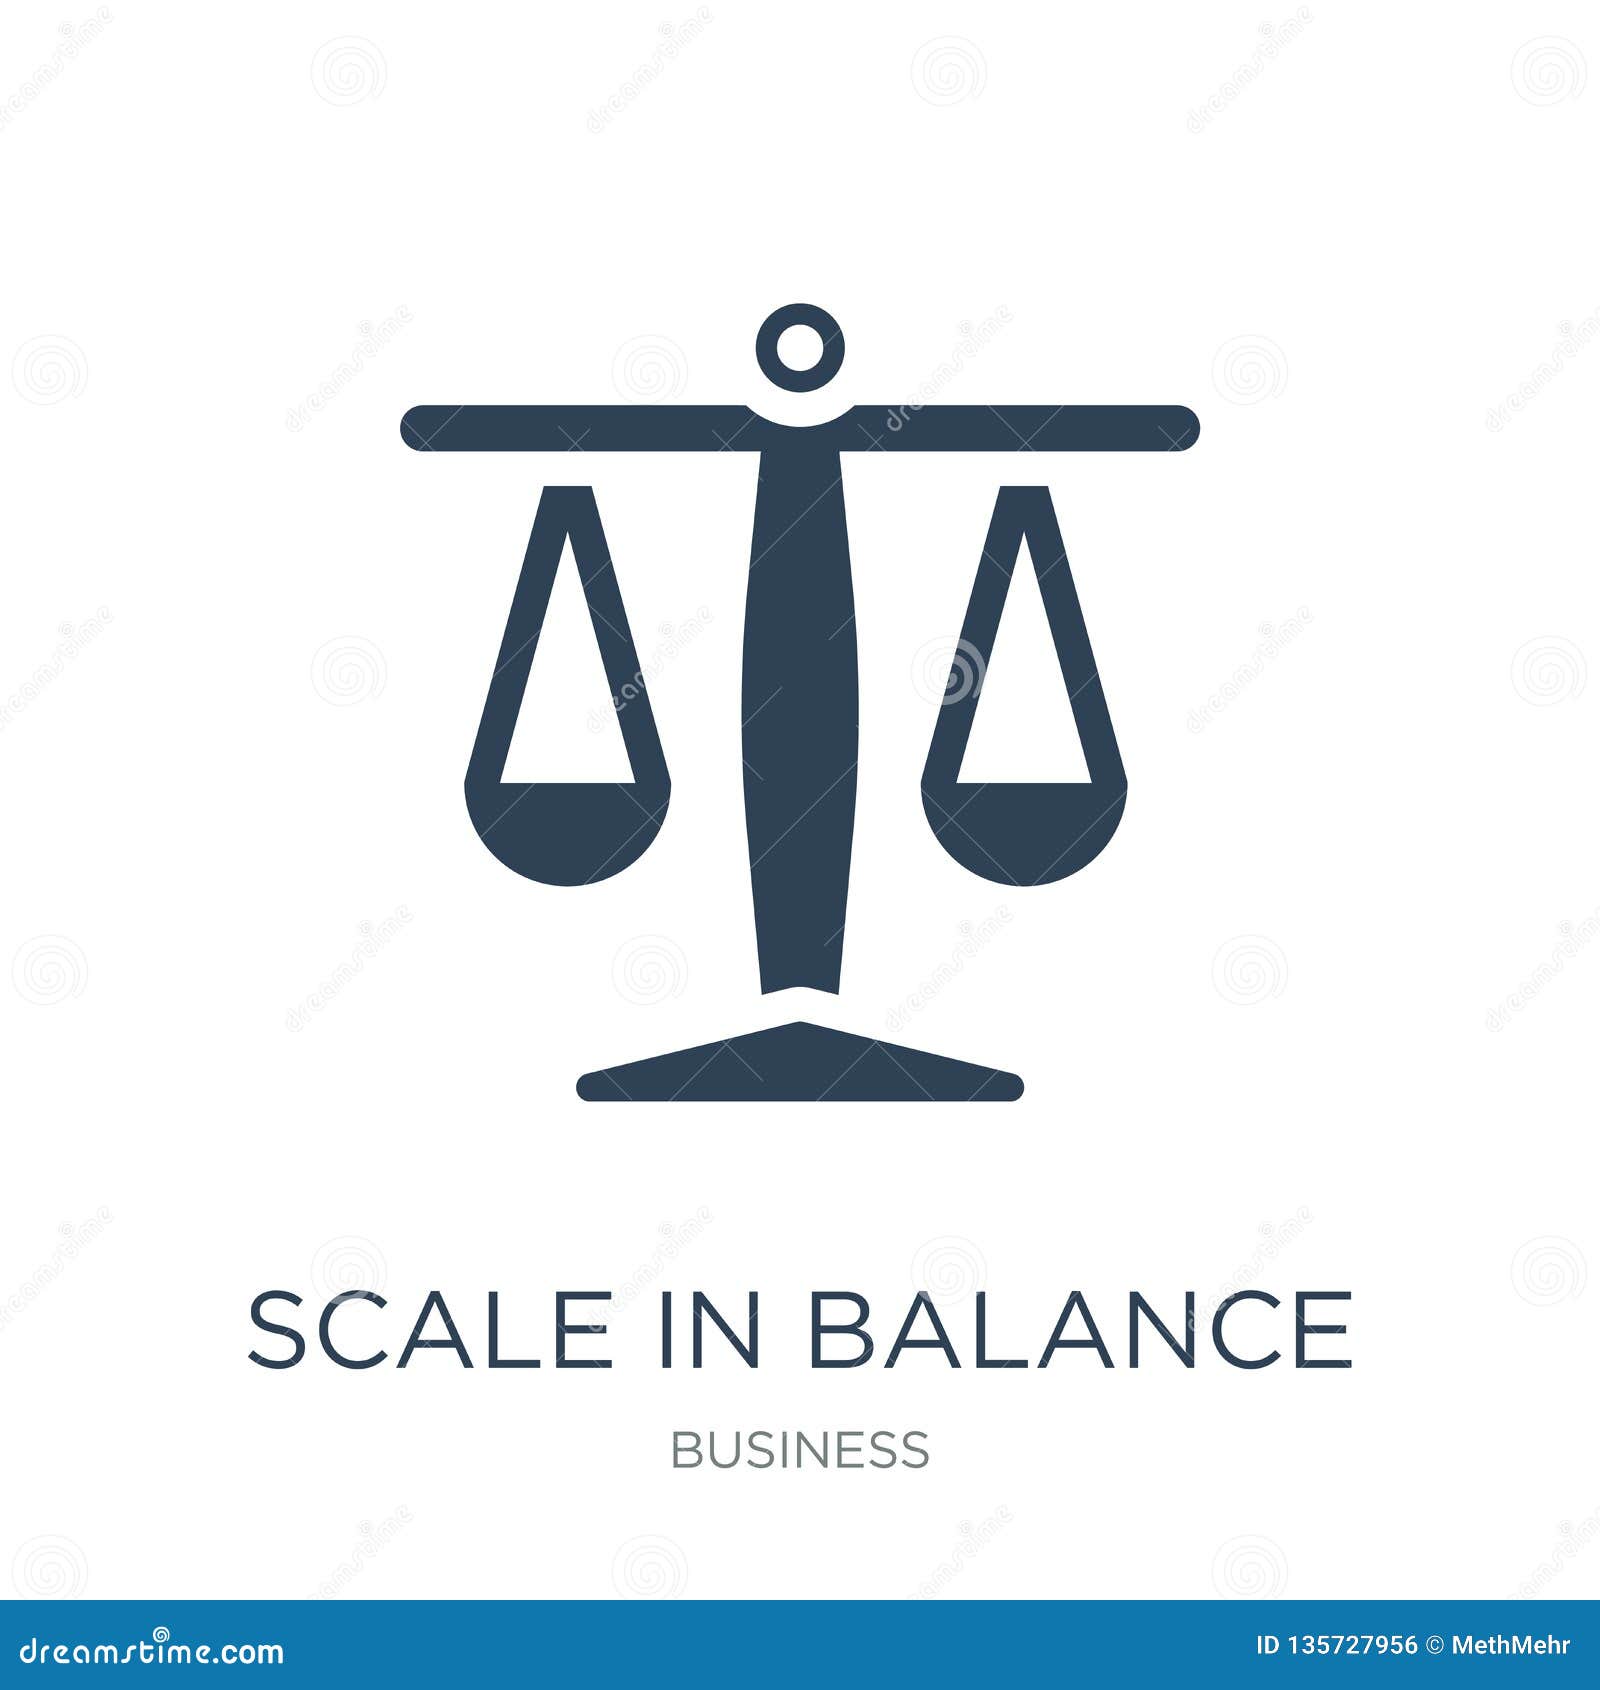 Uneven balance scale silhouette icon set. Clipart image isolated on white  background. Stock Vector